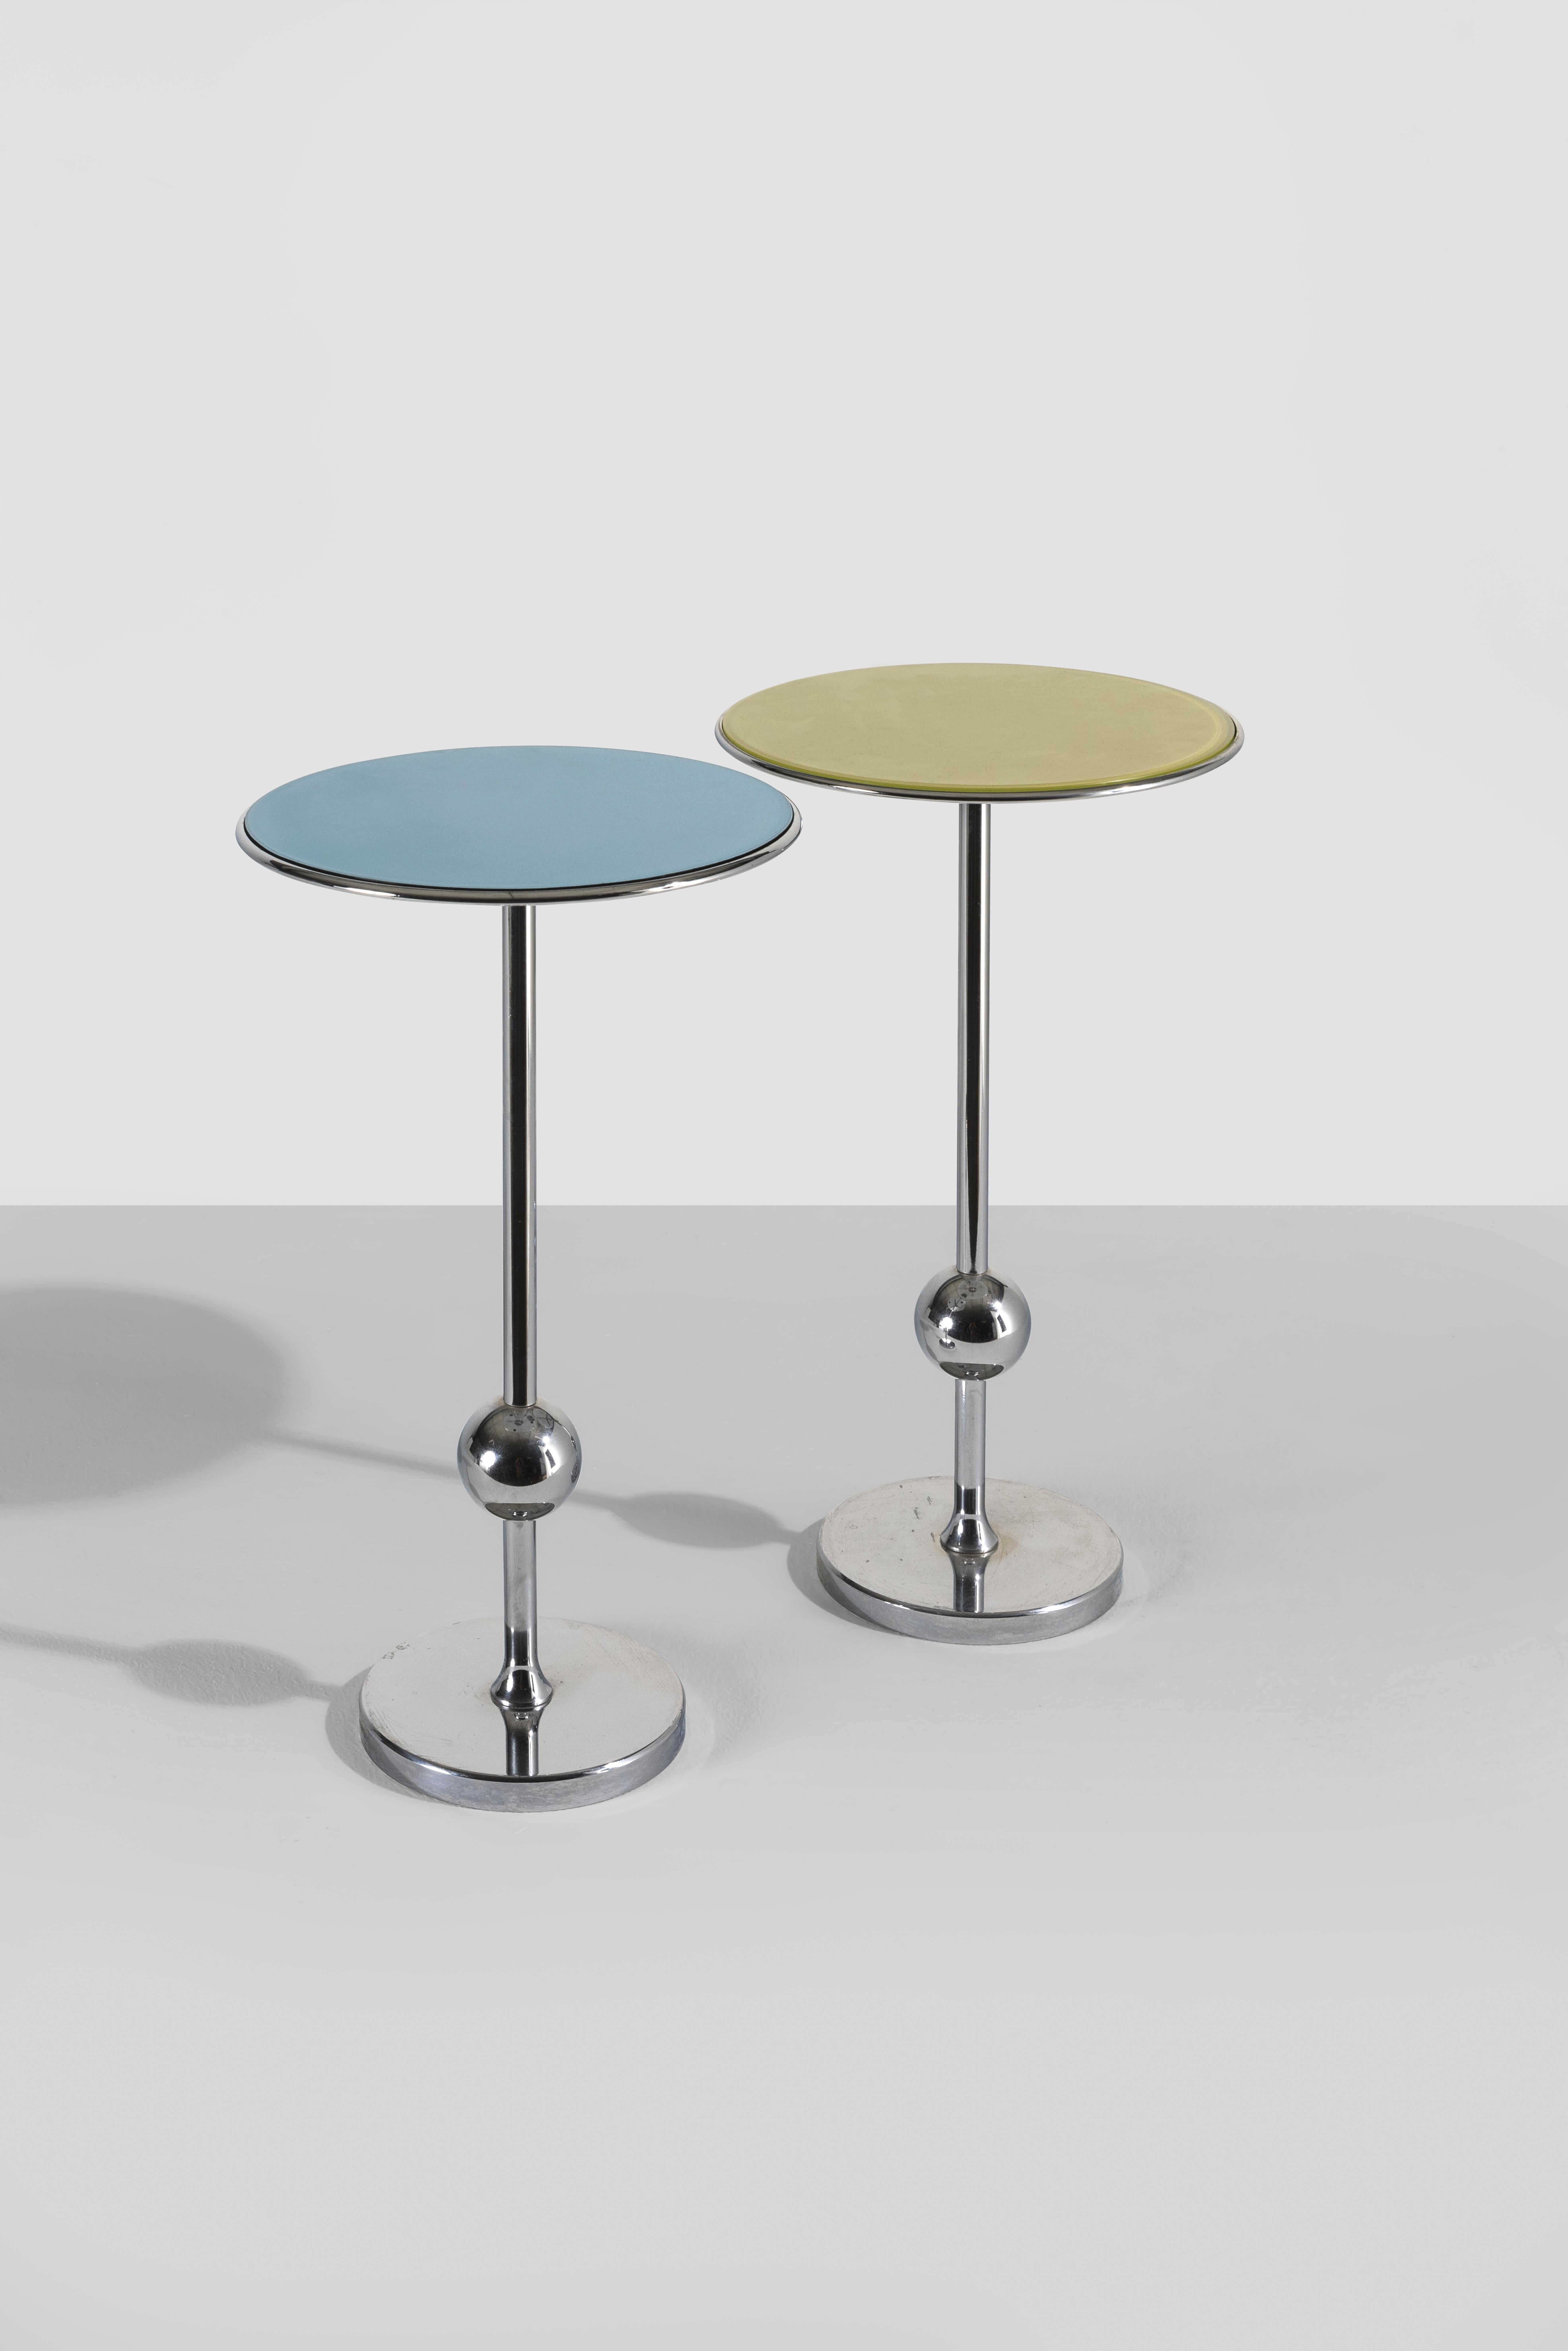 Pair of gueridons that are fun, interesting and decorative in their simplicity. The chrome structure contrasts with the colored glass top, creating a very decorative and attractive color play. The 1949 design is a trait clearly traceable to the